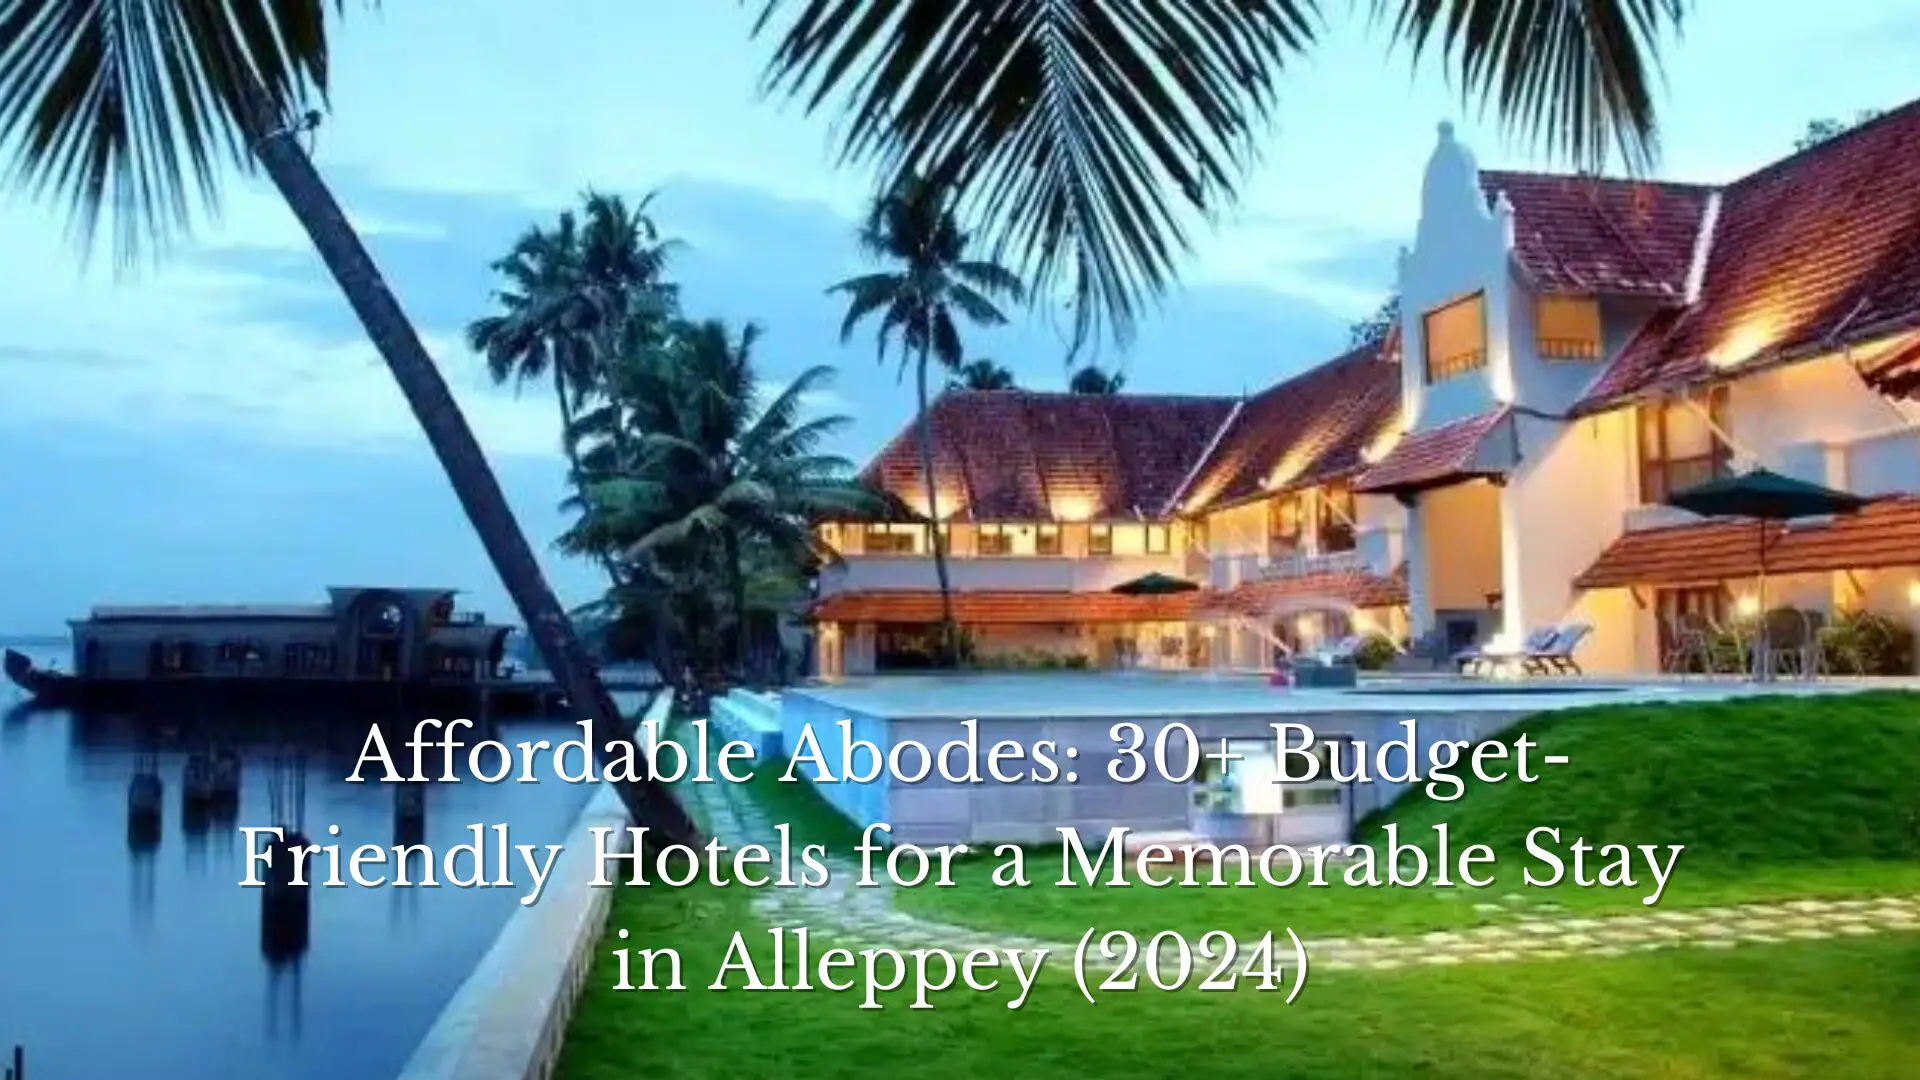 Affordable Abodes: 30+ Budget-Friendly Hotels for a Memorable Stay in Alleppey (2024)